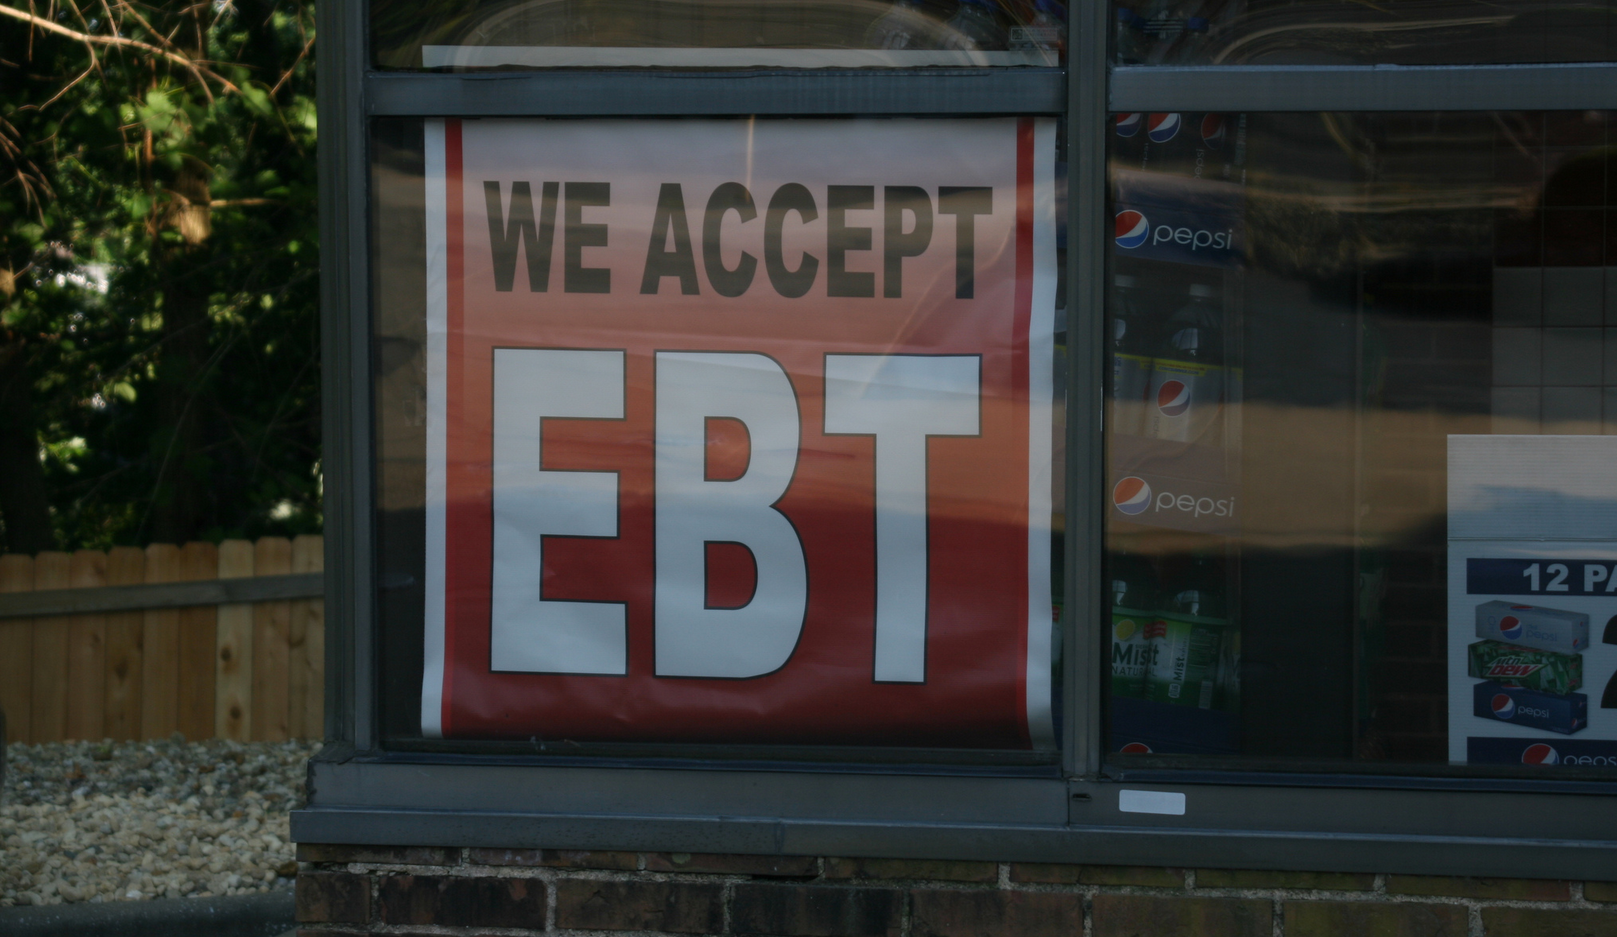 Gas Stations that accept EBT